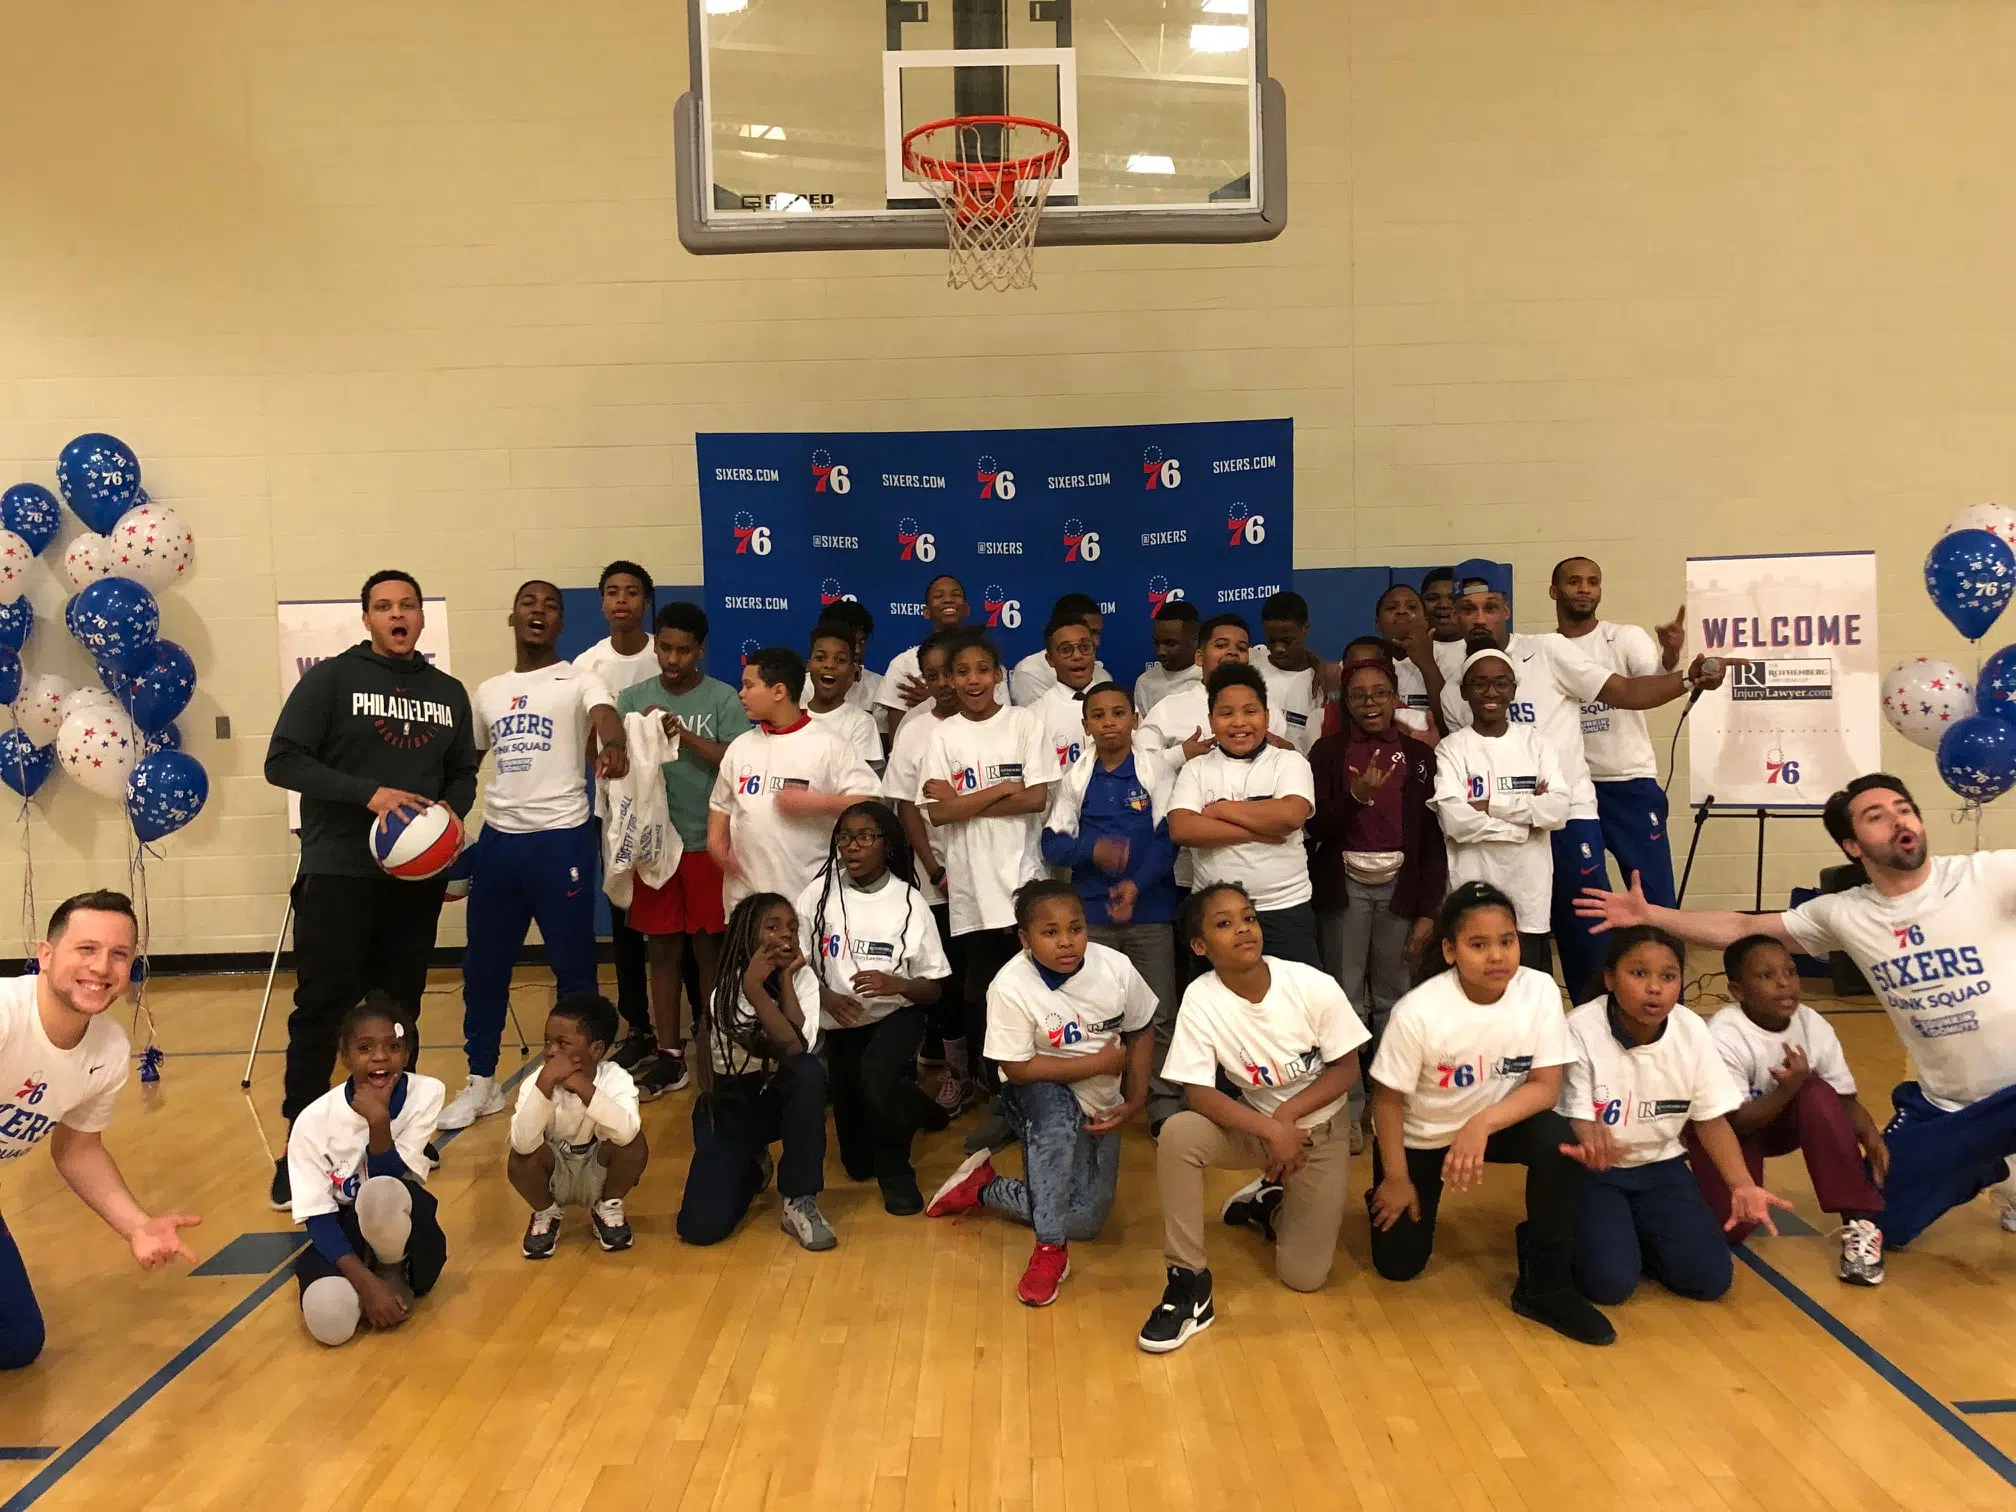 Children from the Chester, PA area pose for a picture under a basketball hoop with Philadelphia 76ers tee-shirts